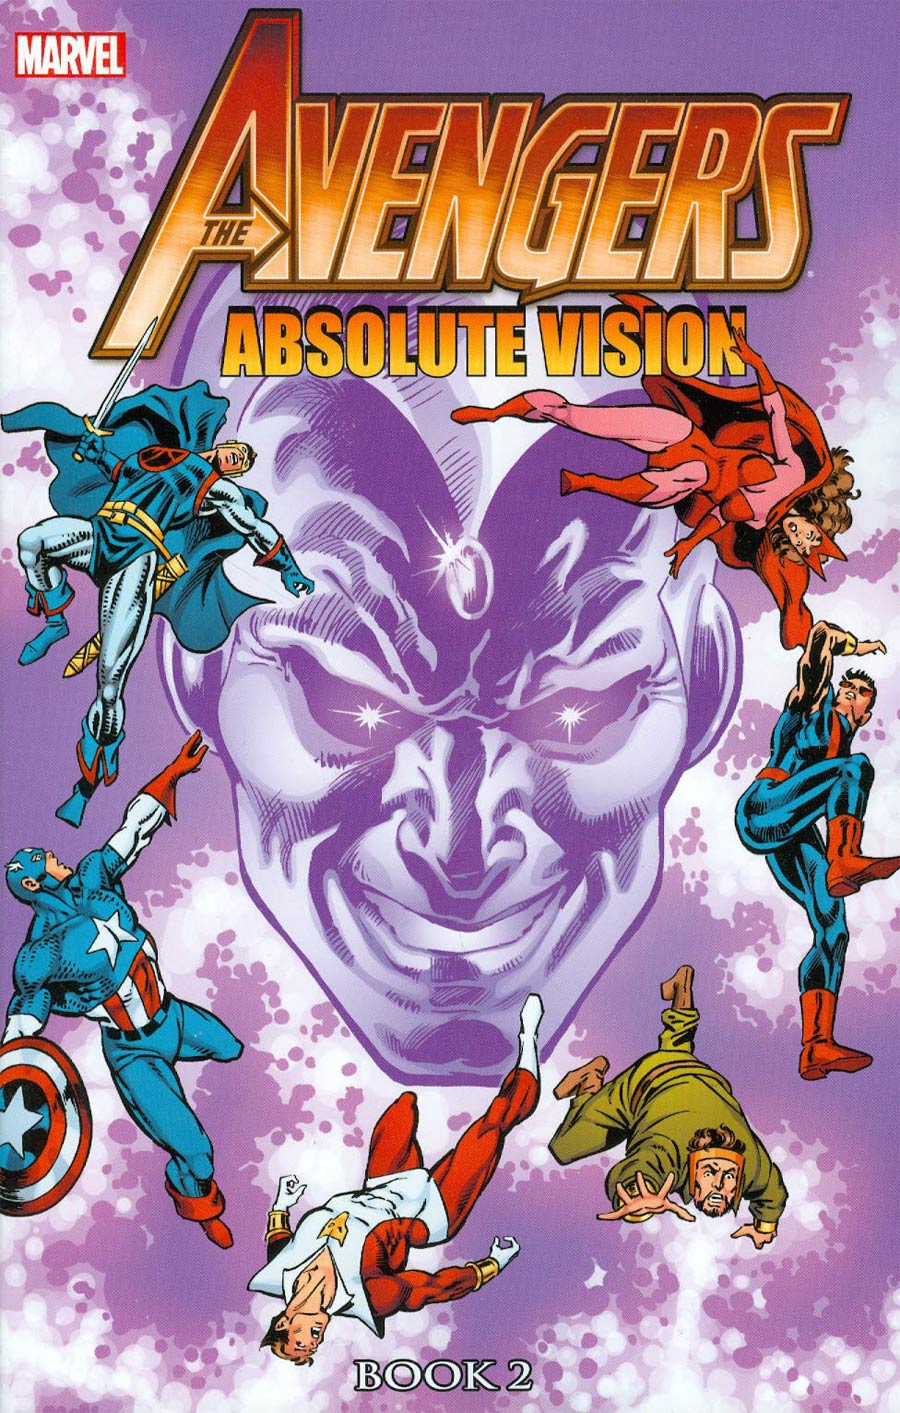 Avengers Absolute Vision Book 2 TP